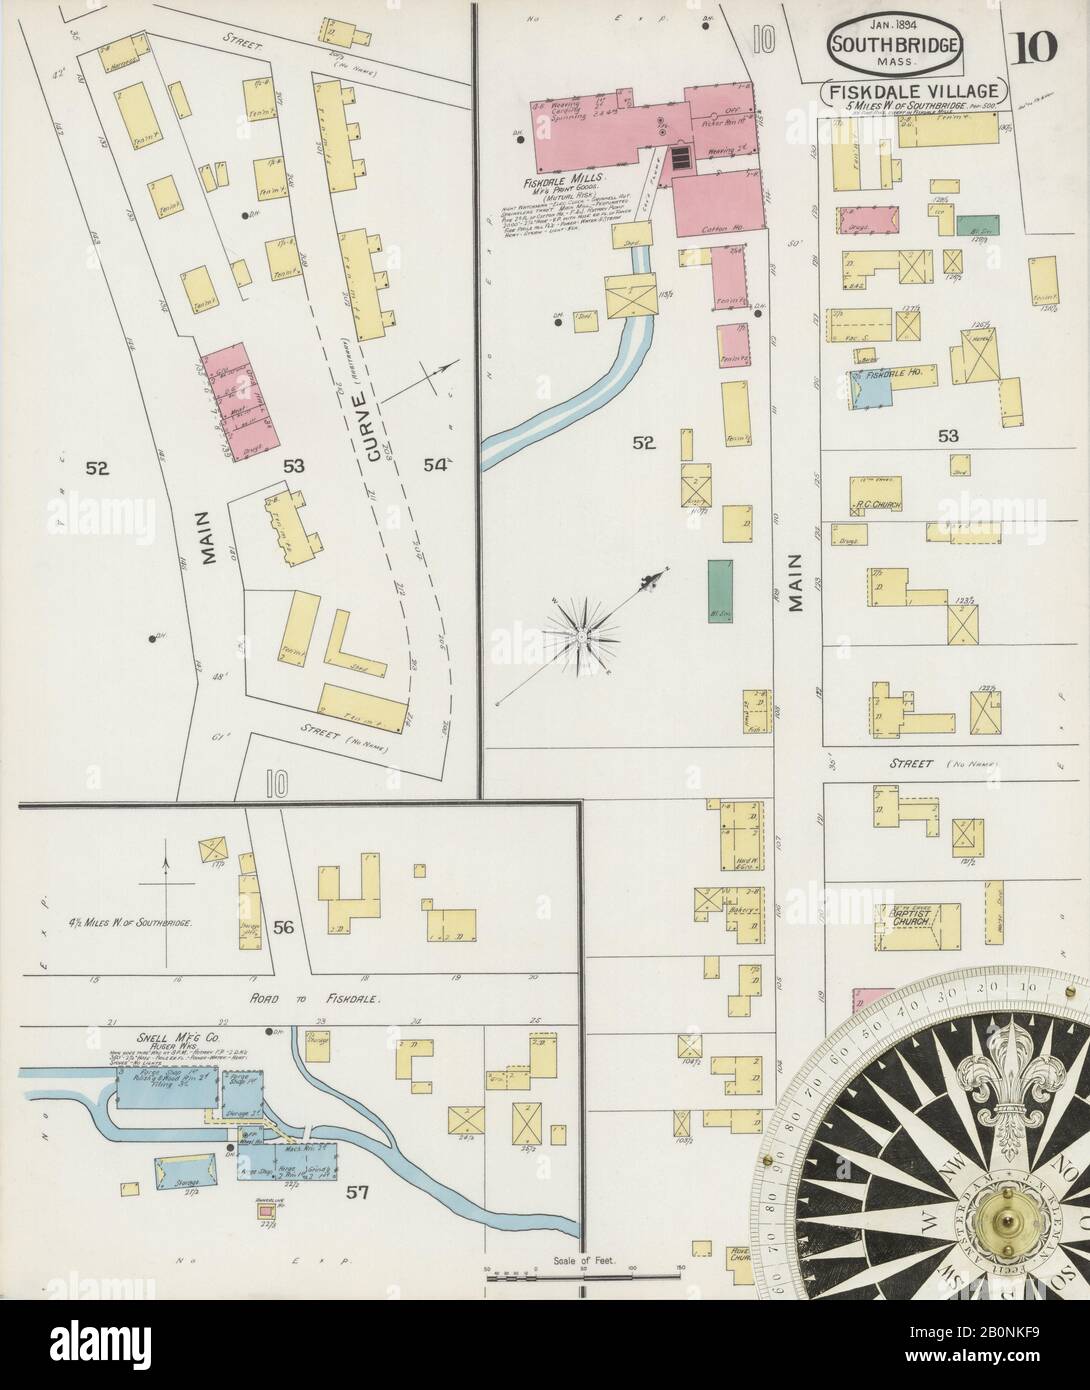 Image 10 of Sanborn Fire Insurance Map from Southbridge, Worcester County, Massachusetts. Jan 1894. 10 Sheet(s). Includes Globe Village, Sturbridge, Fiskdale, America, street map with a Nineteenth Century compass Stock Photo